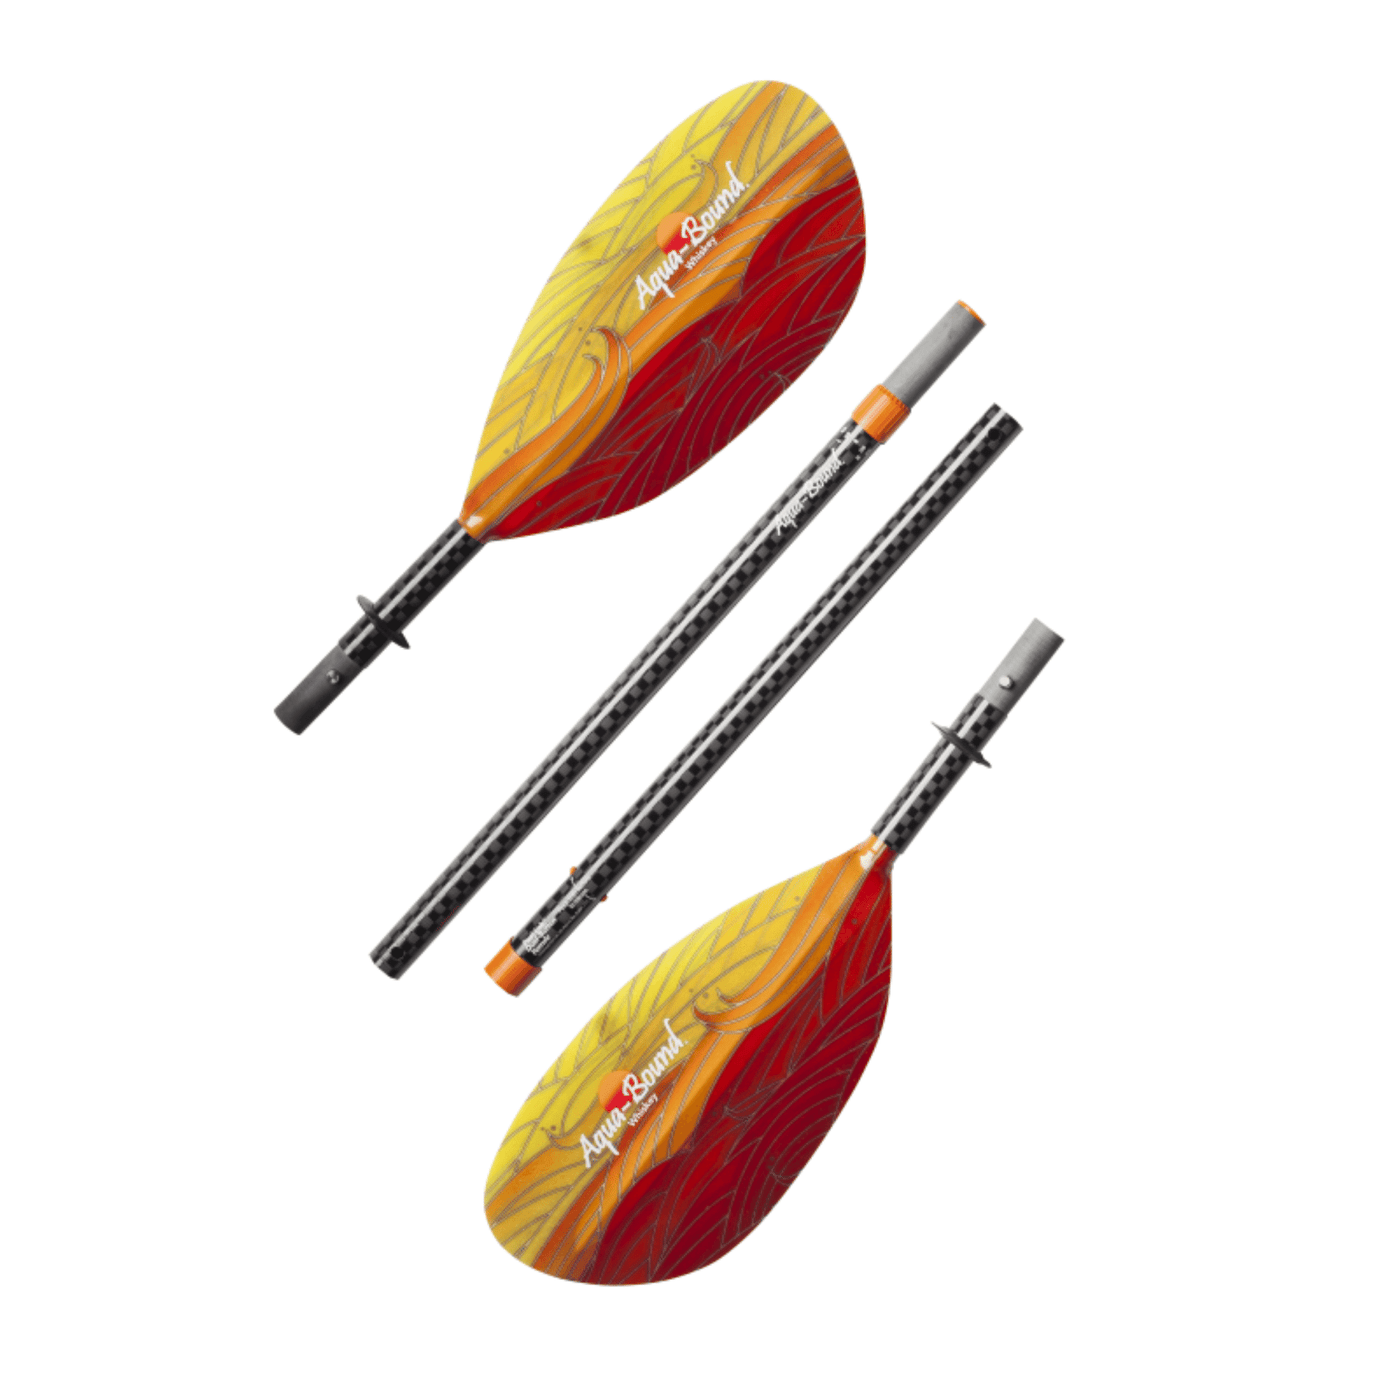 Aqua Bound Whiskey Fibreglass - 4 Piece | Pack Rafting Paddle | Further Faster Christchurch NZ #fuego